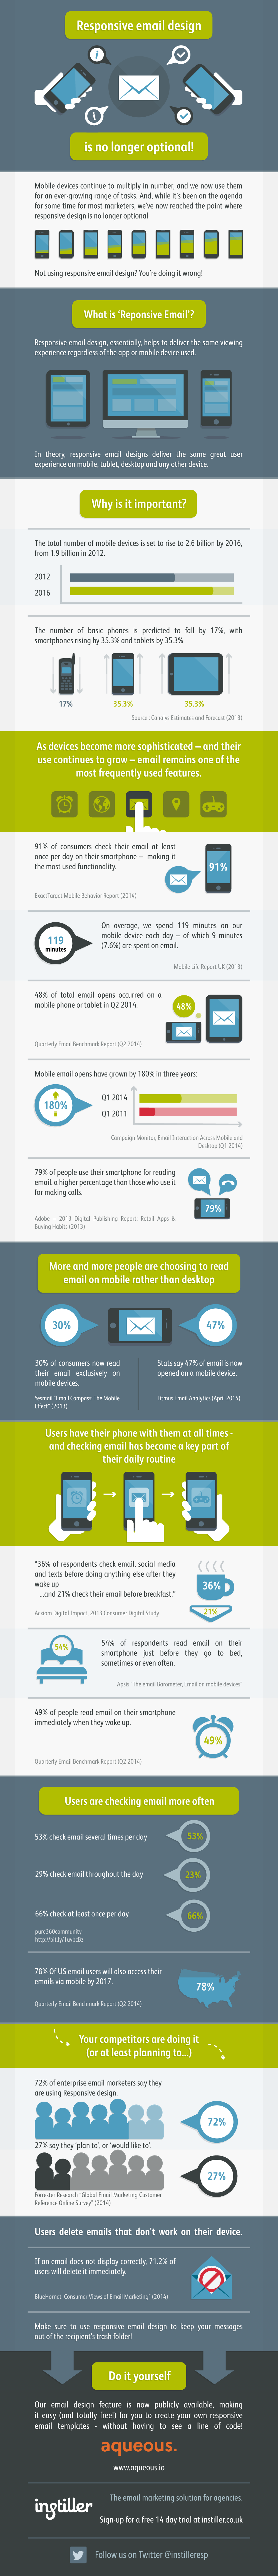 Responsive email design is no longer optional